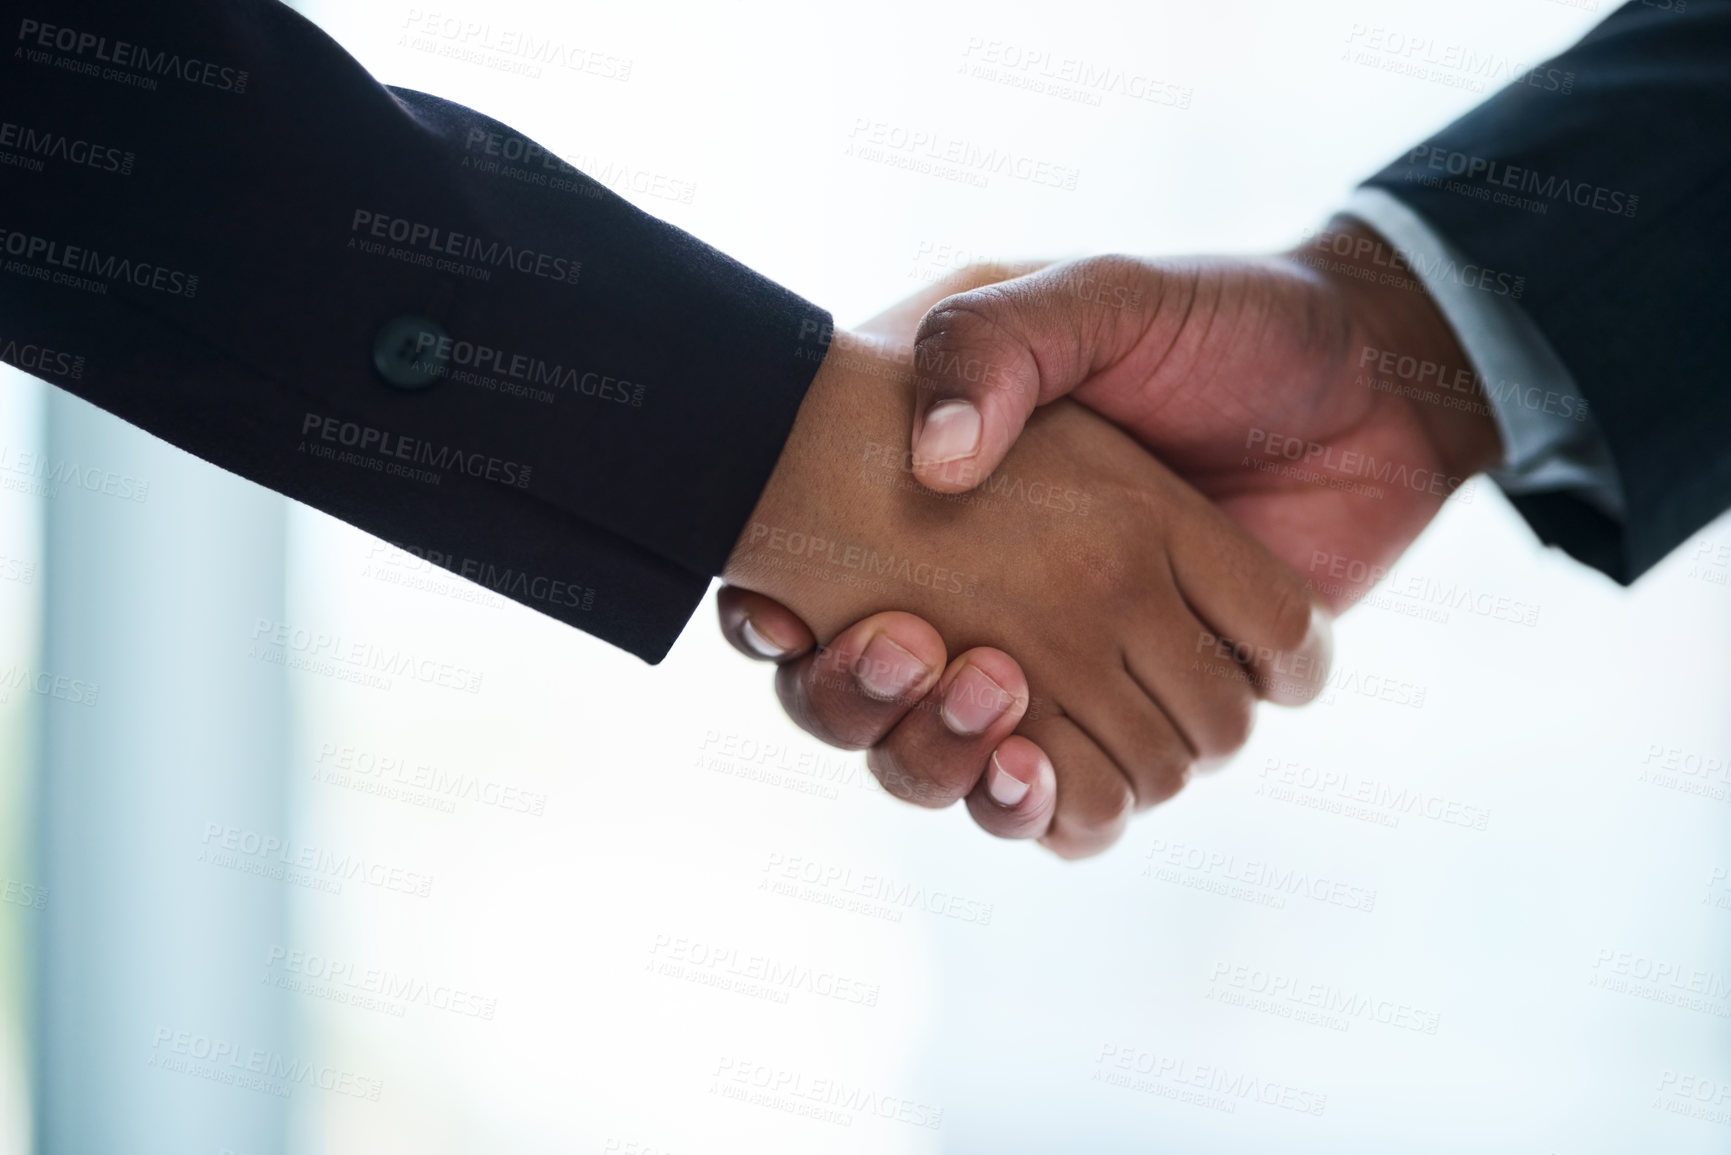 Buy stock photo Cropped shot of two unrecognizable businesspeople shaking hands in an office